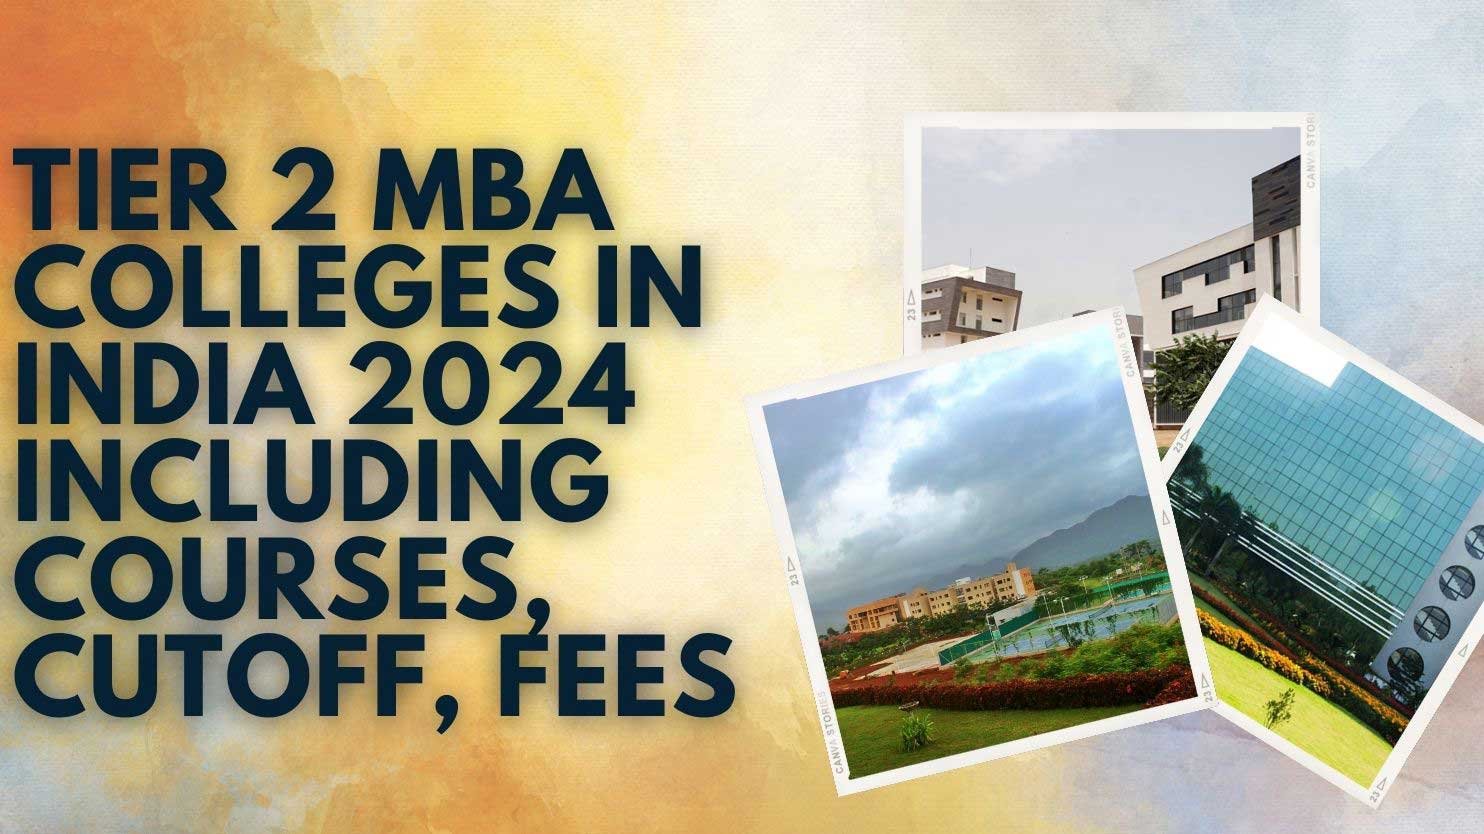 Top Mba Colleges For Supply Chain Management In India Formfees